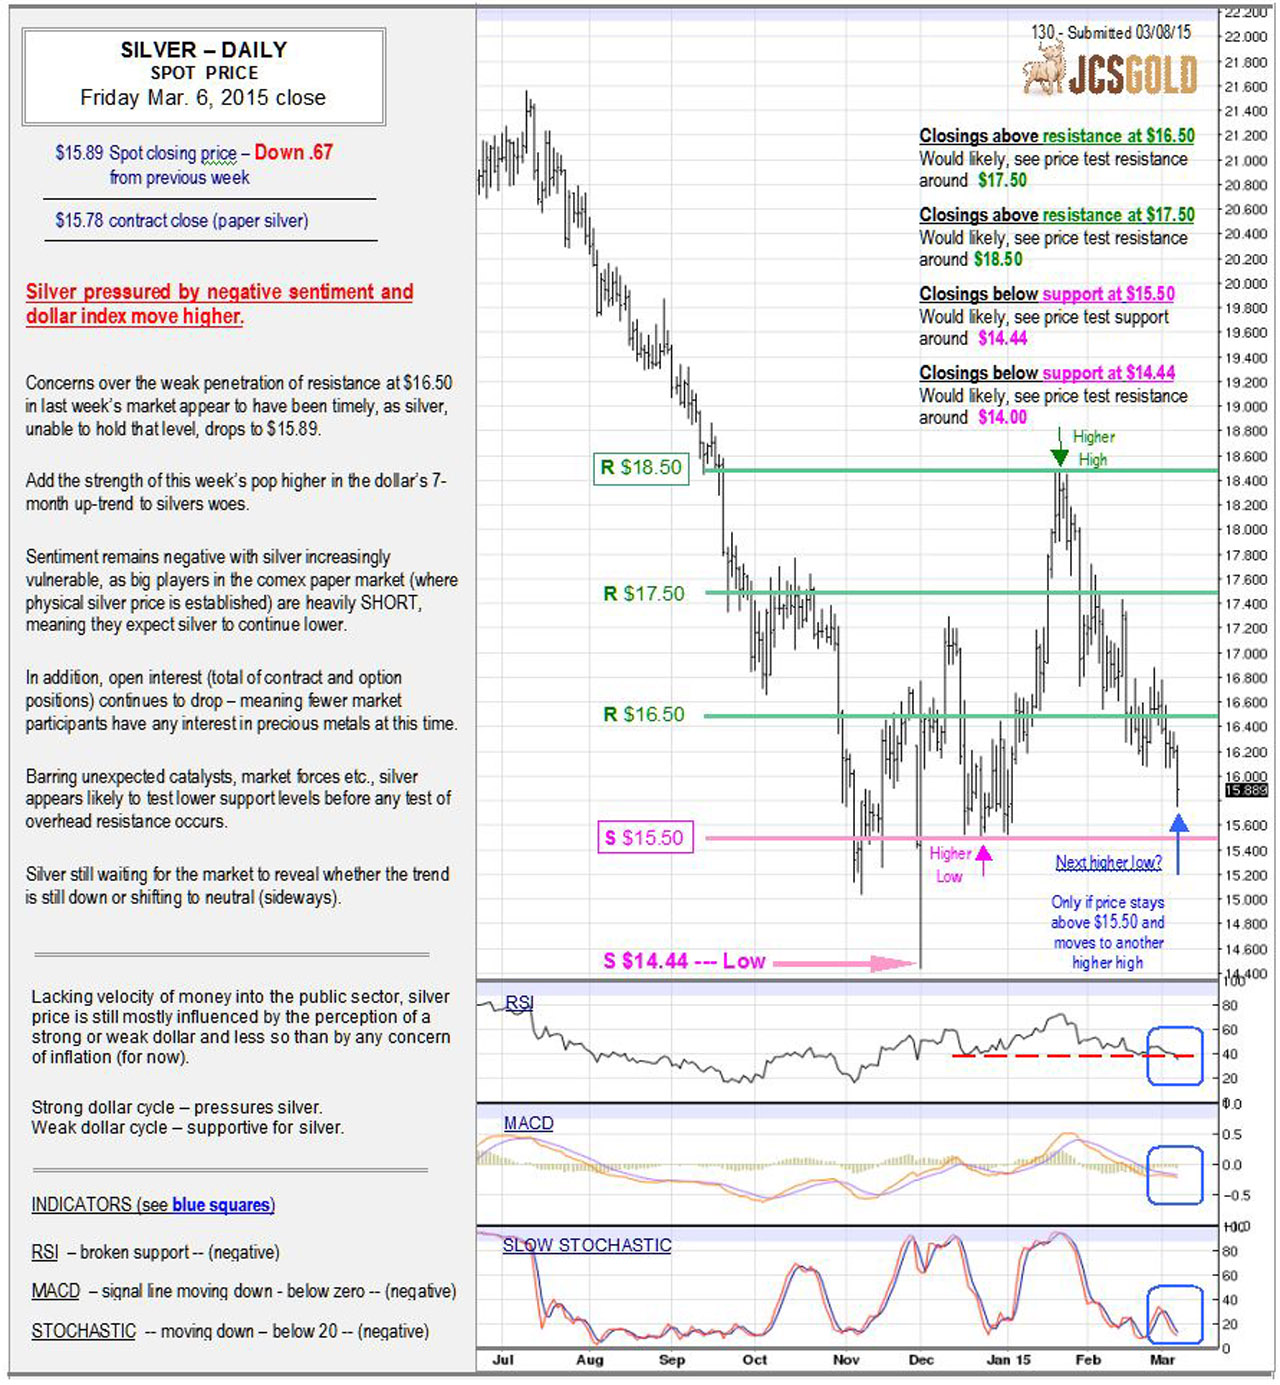 Mar 6, 2015 chart & commentary